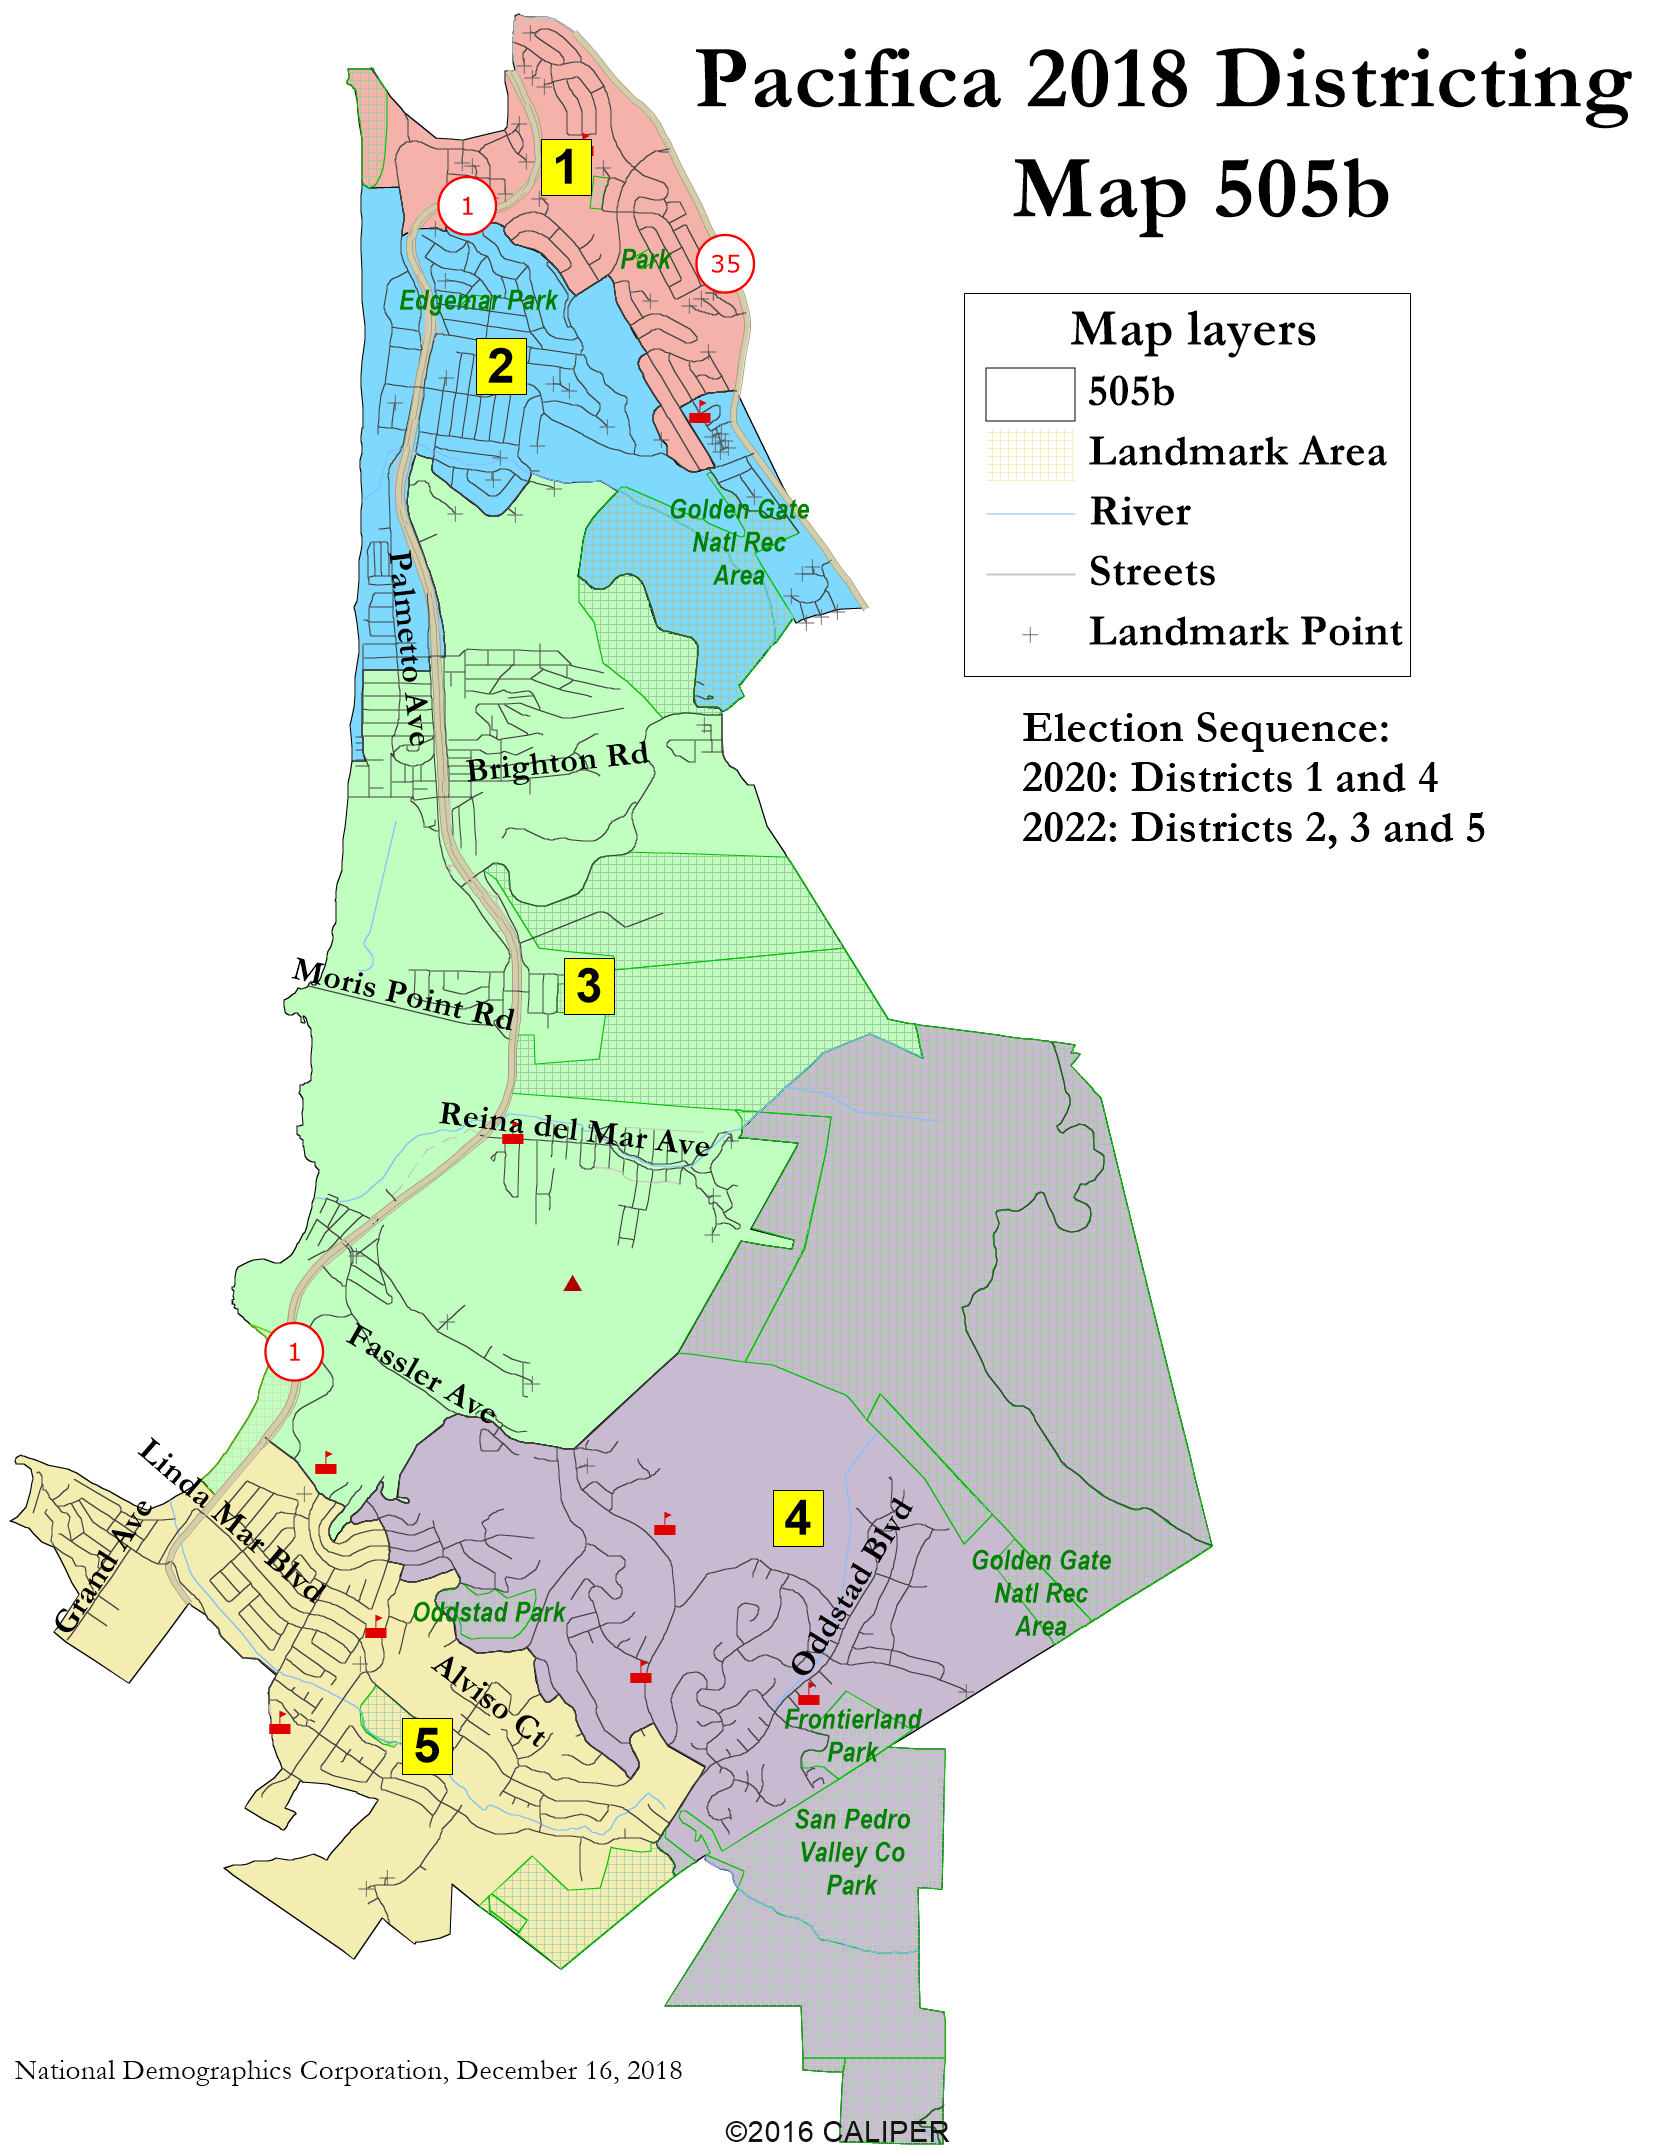 Pacifica 2018 Districting Map 505b